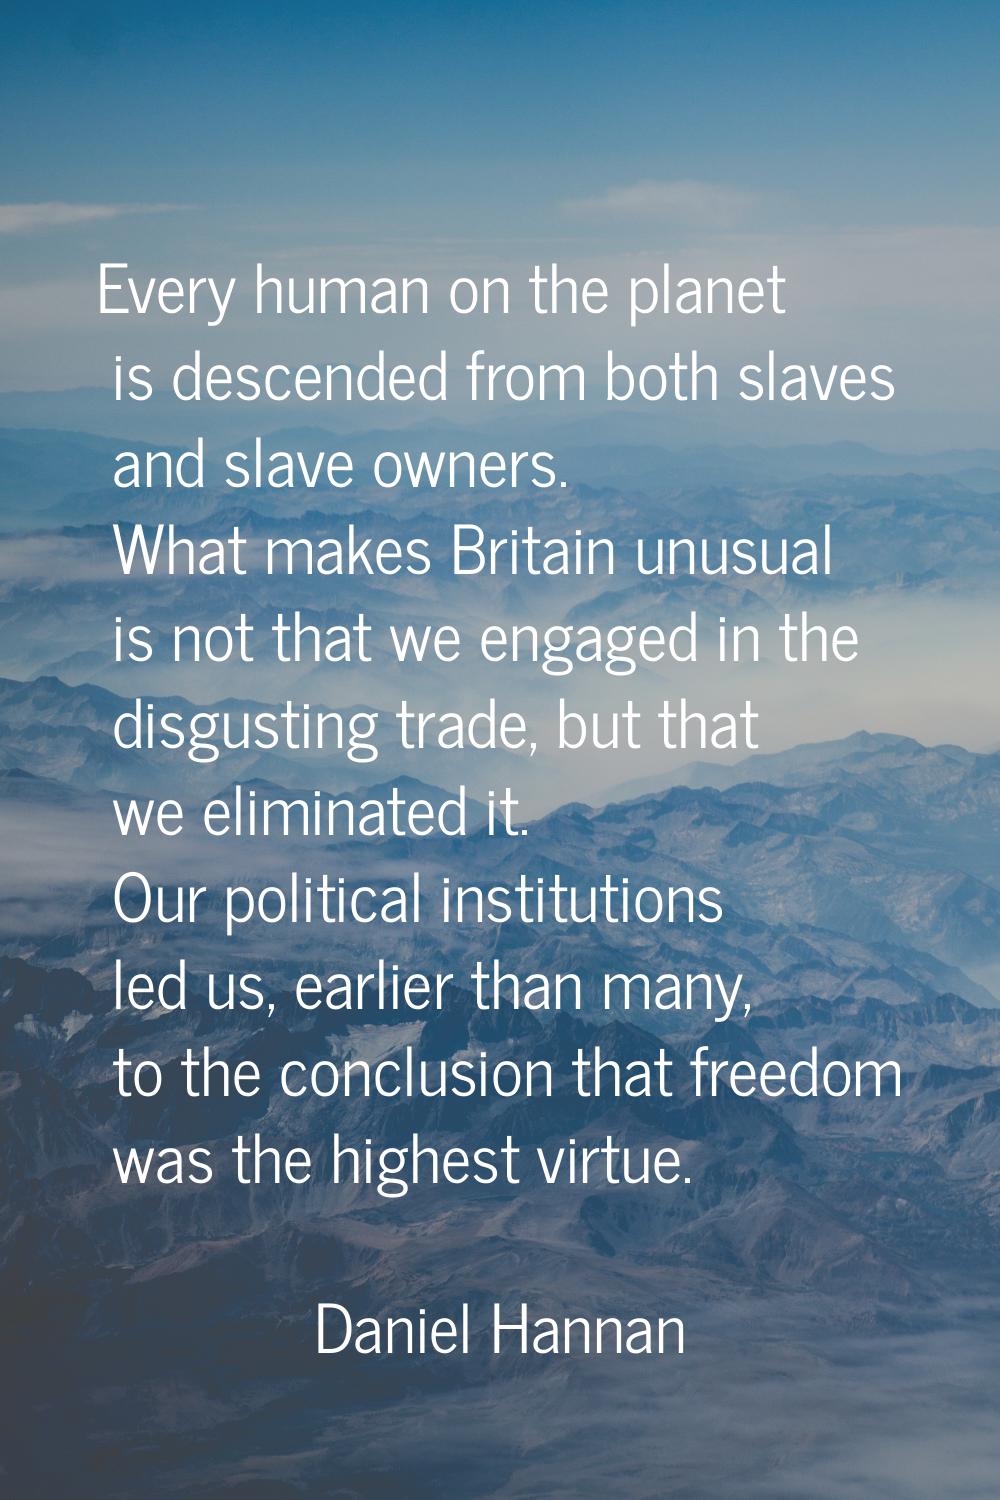 Every human on the planet is descended from both slaves and slave owners. What makes Britain unusua